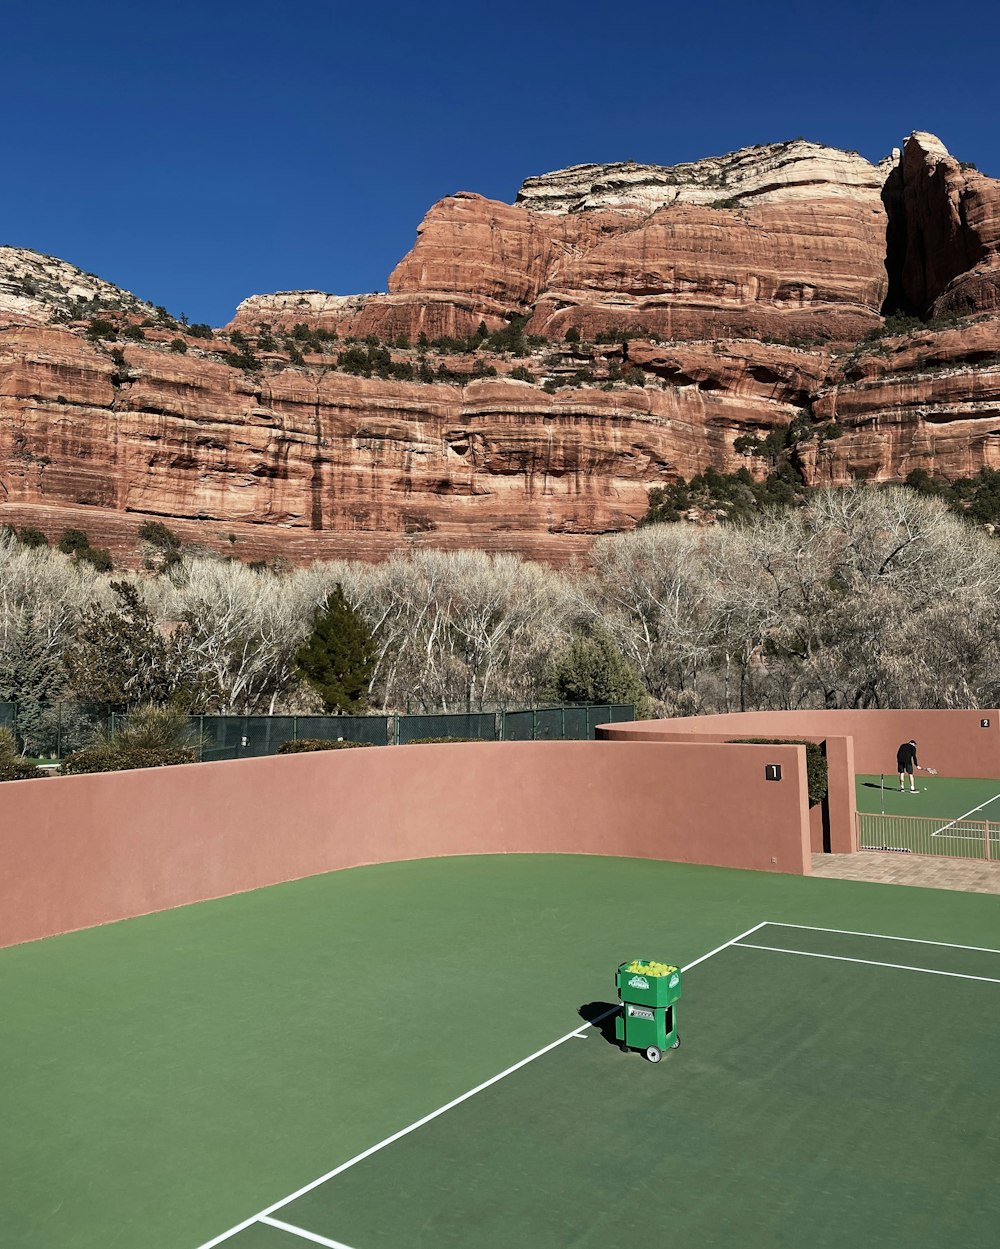 Saint George tennis court with red rock